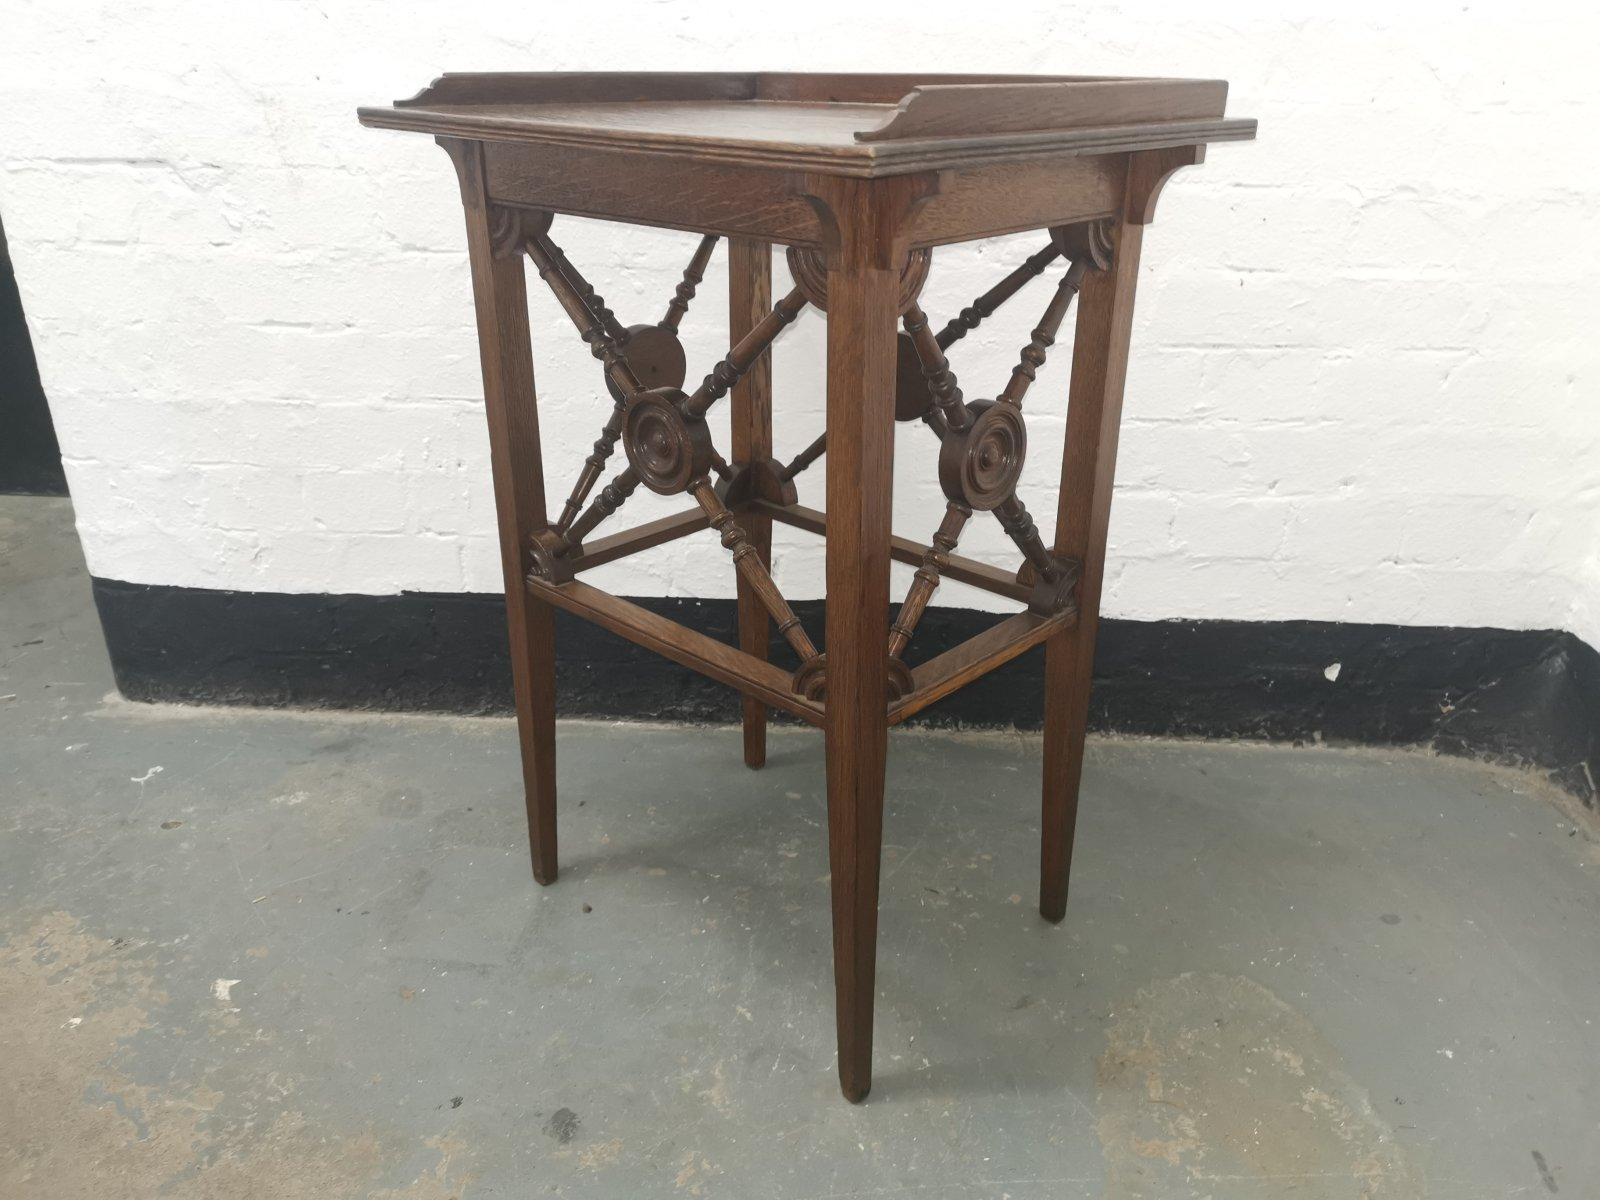 Hand-Crafted Jas Shoolbred Aesthetic Movement Oak Side Table With Cross Turned & Disc Details For Sale